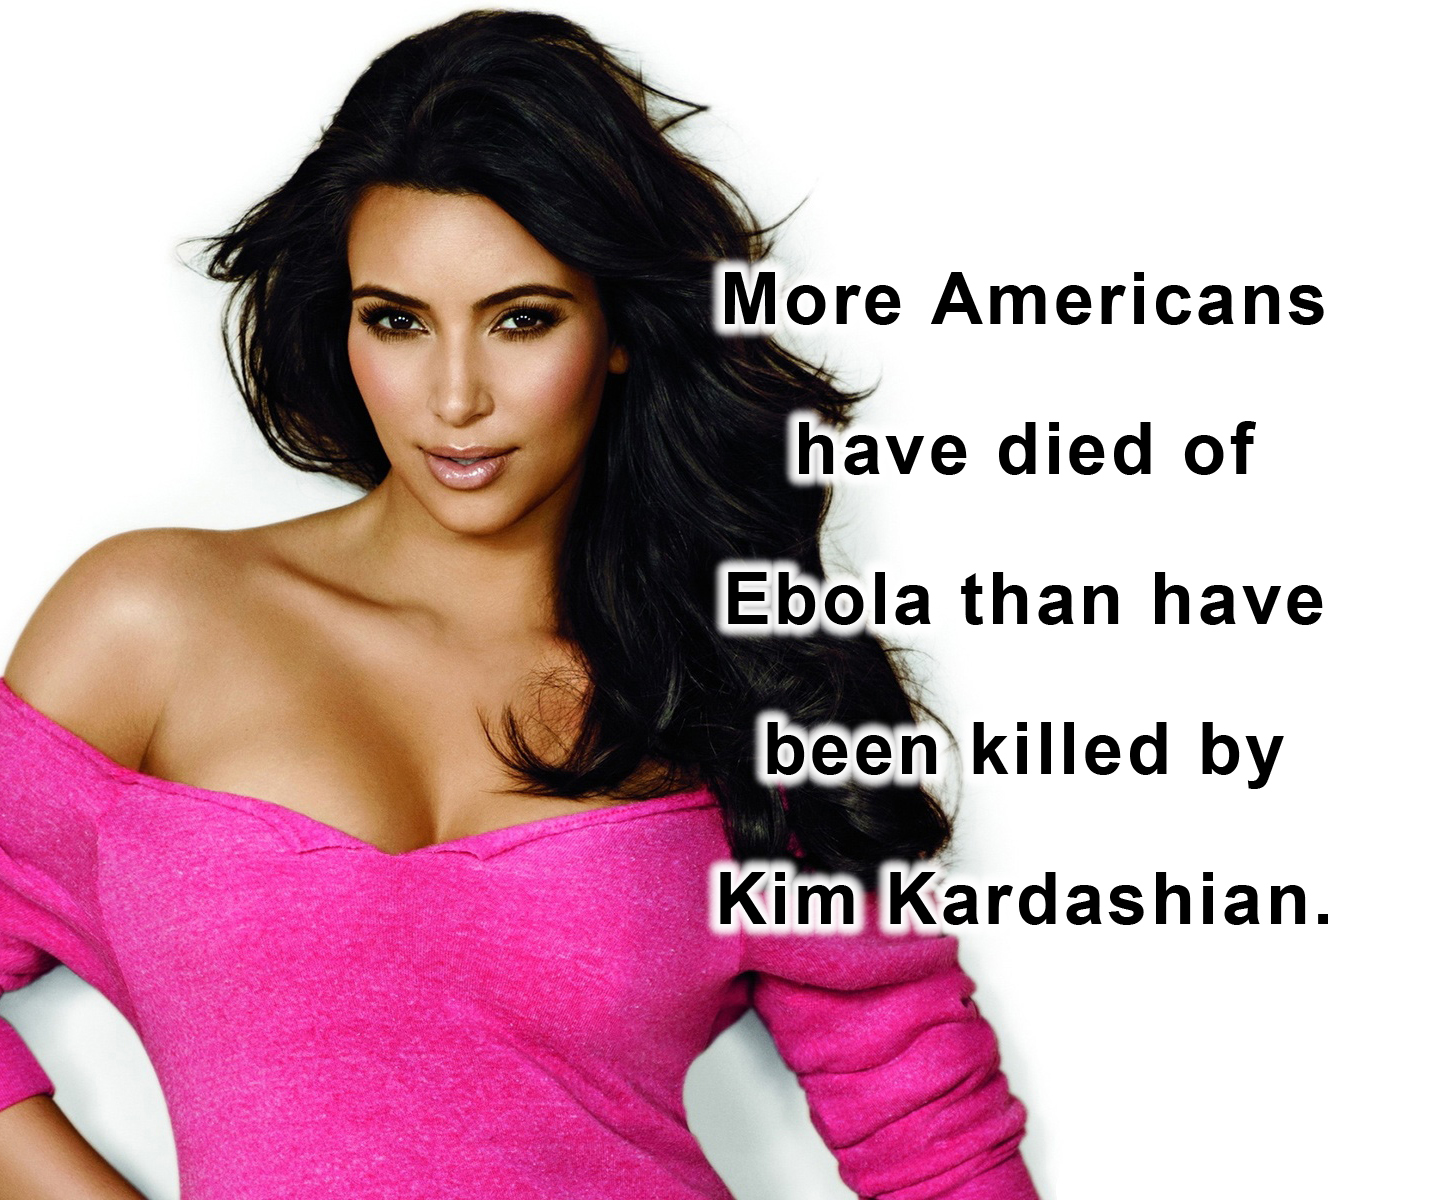 More Americans have died from Ebola than have been killed by Kim Kardashian.